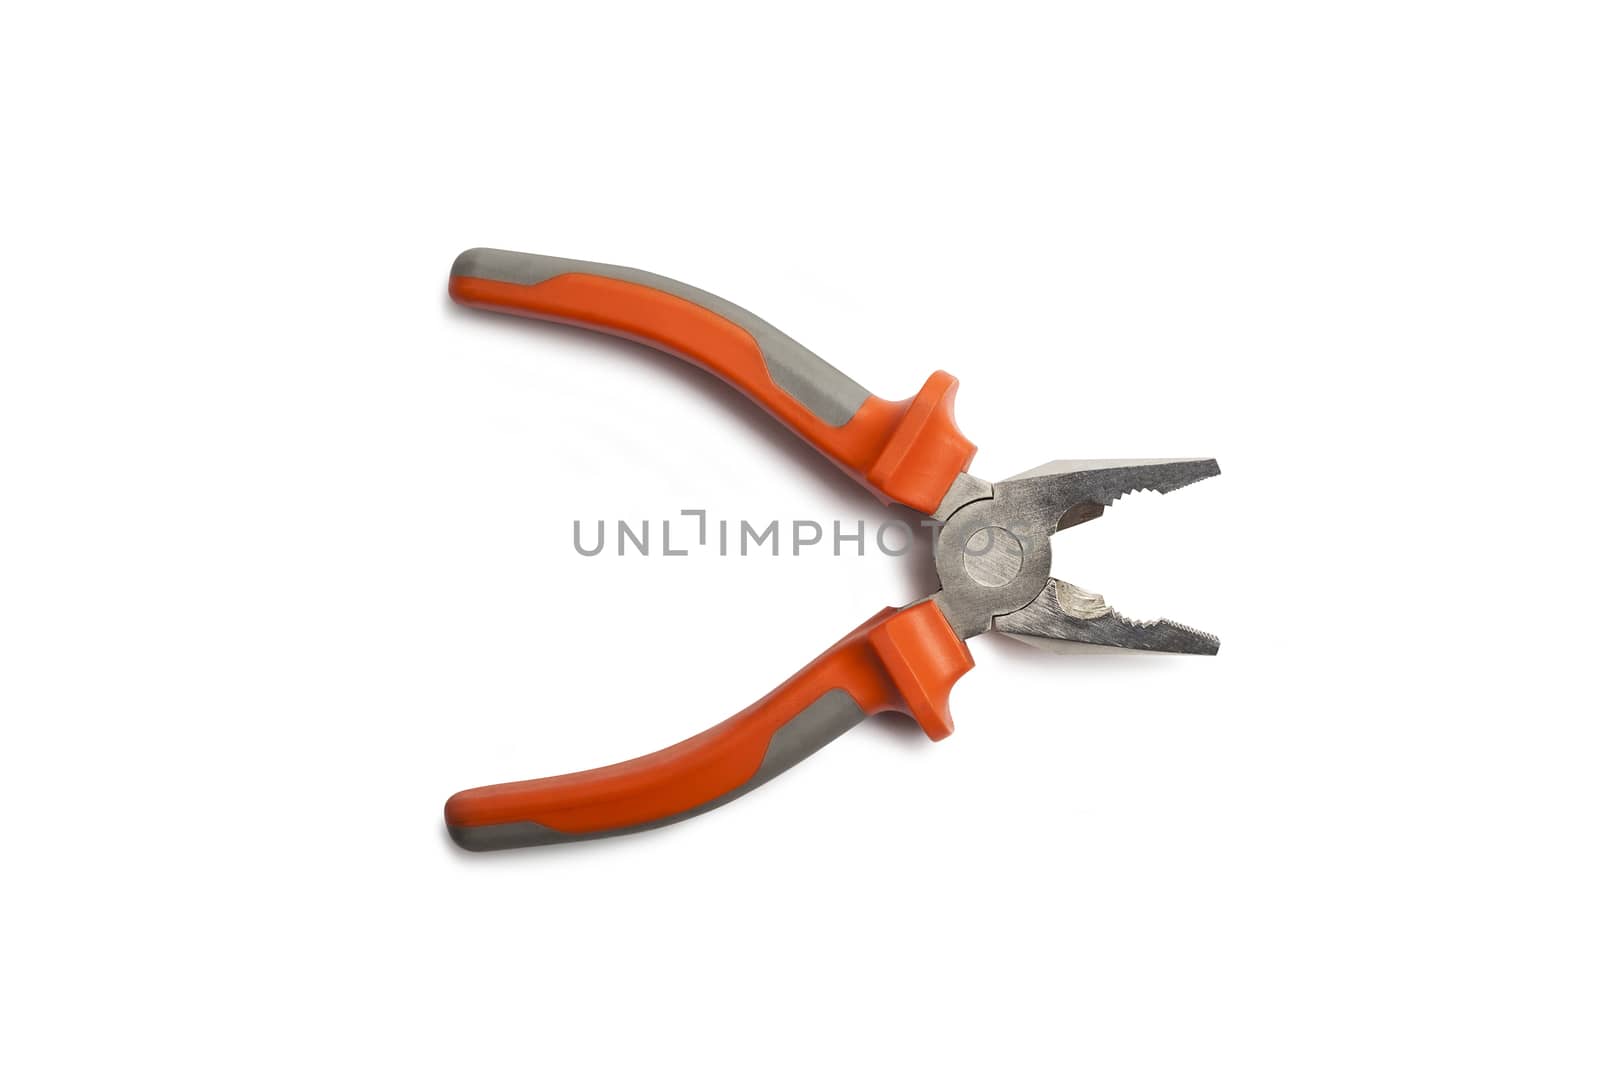 Pliers orange and gray color. Isolated on white background.